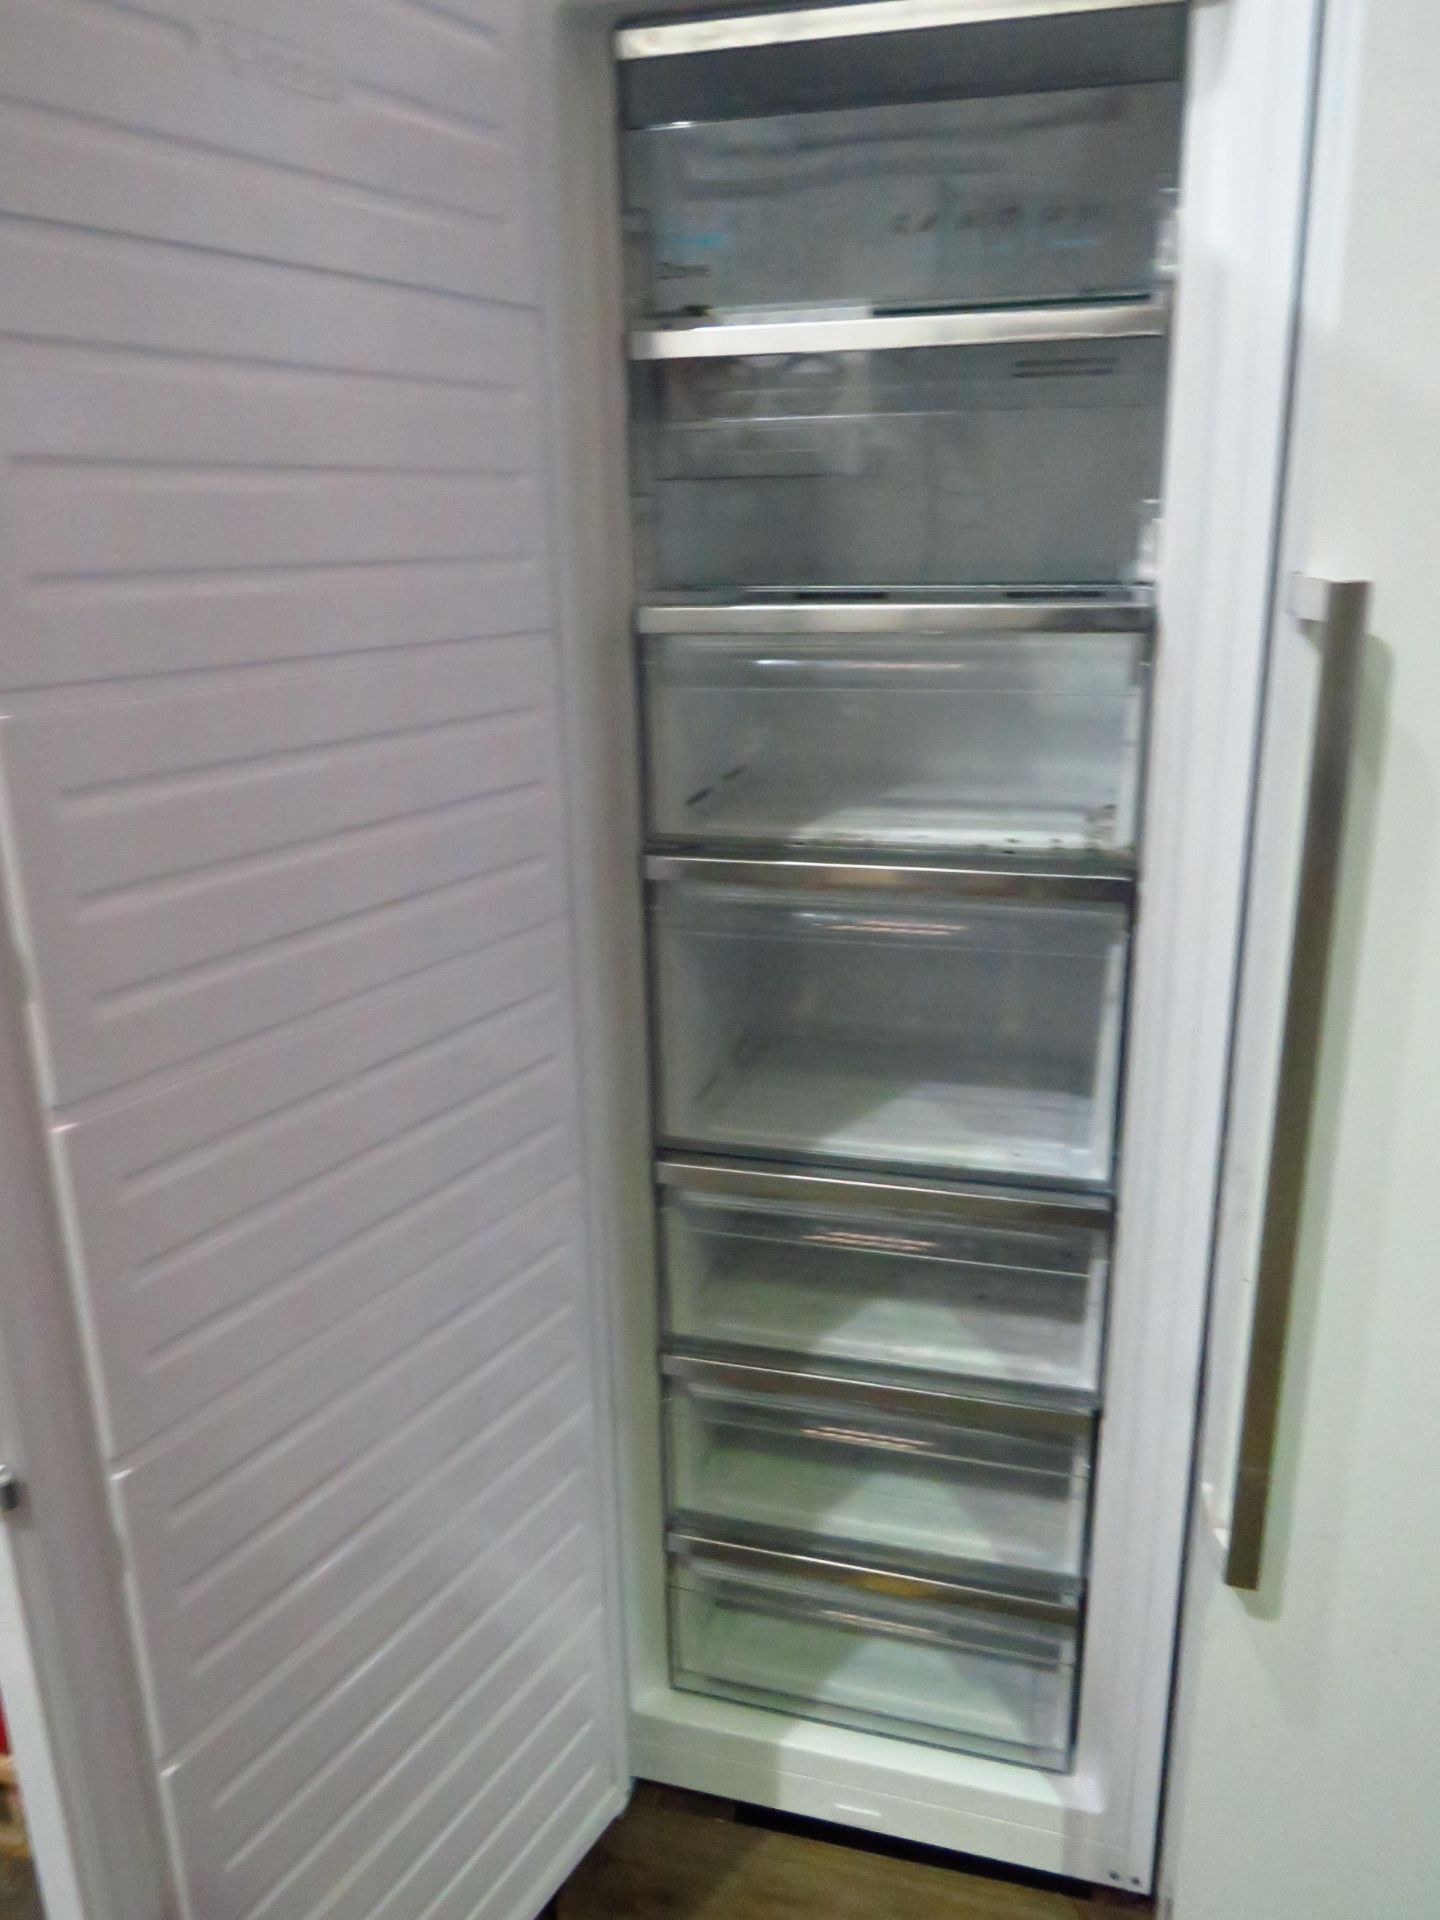 Sharp tall freestanding freezer, tested and working for coldness. - Image 2 of 2